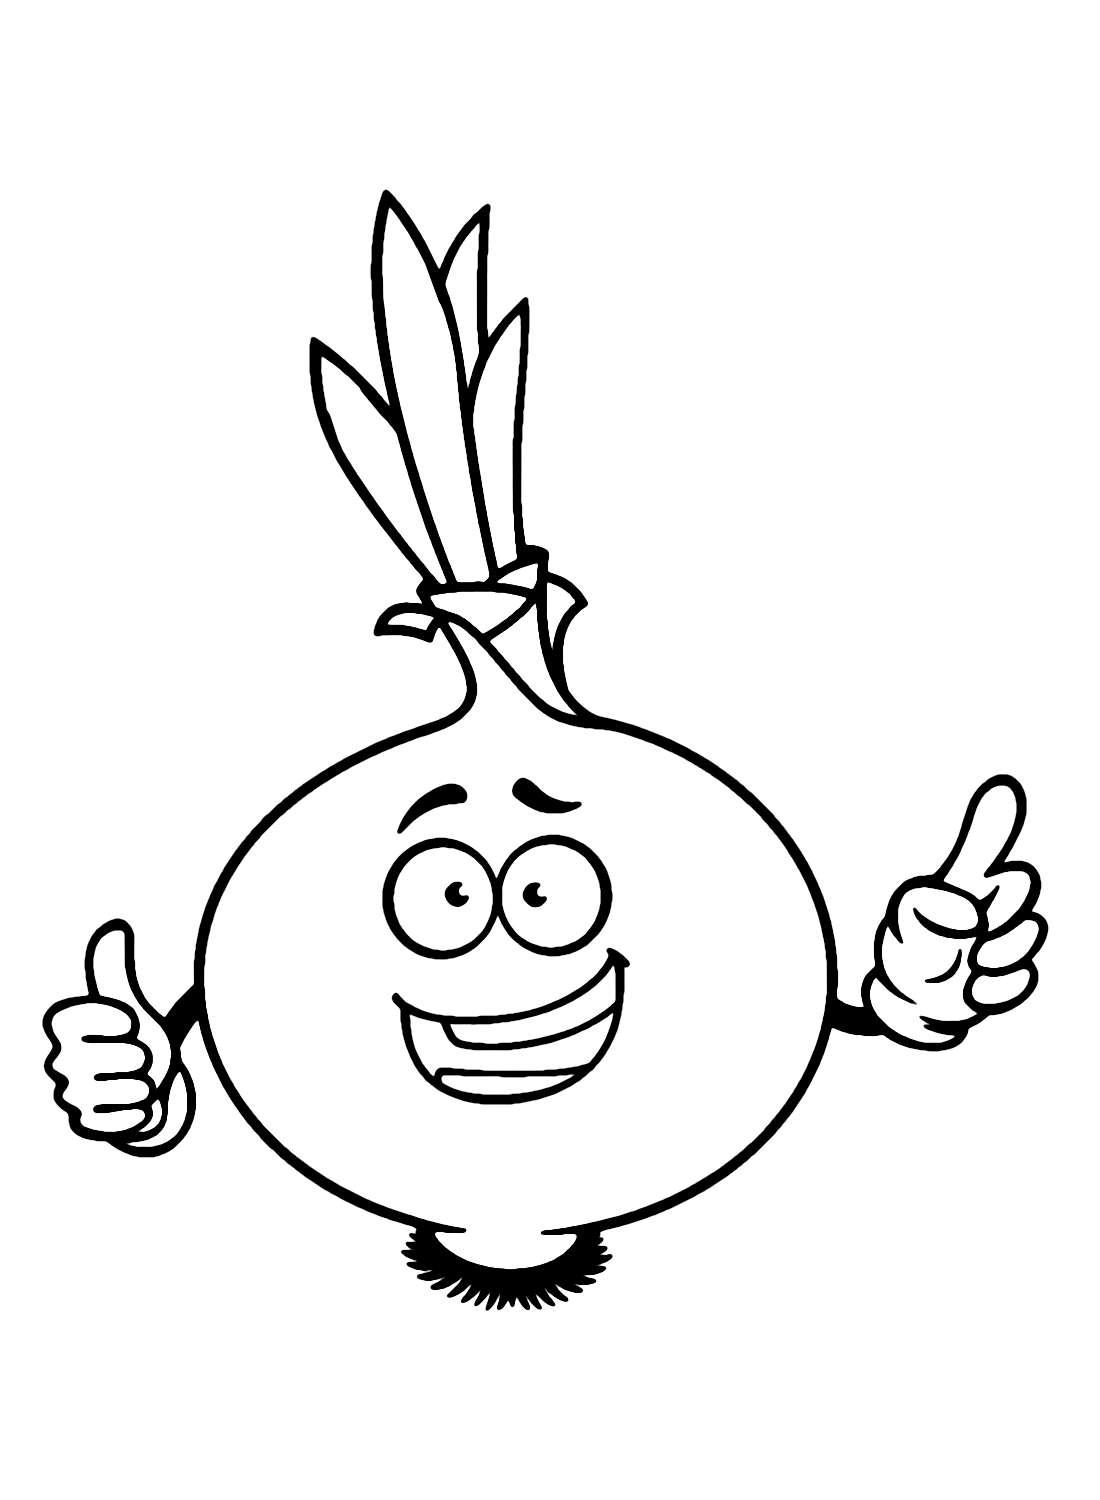 Onion for Kids Coloring Page